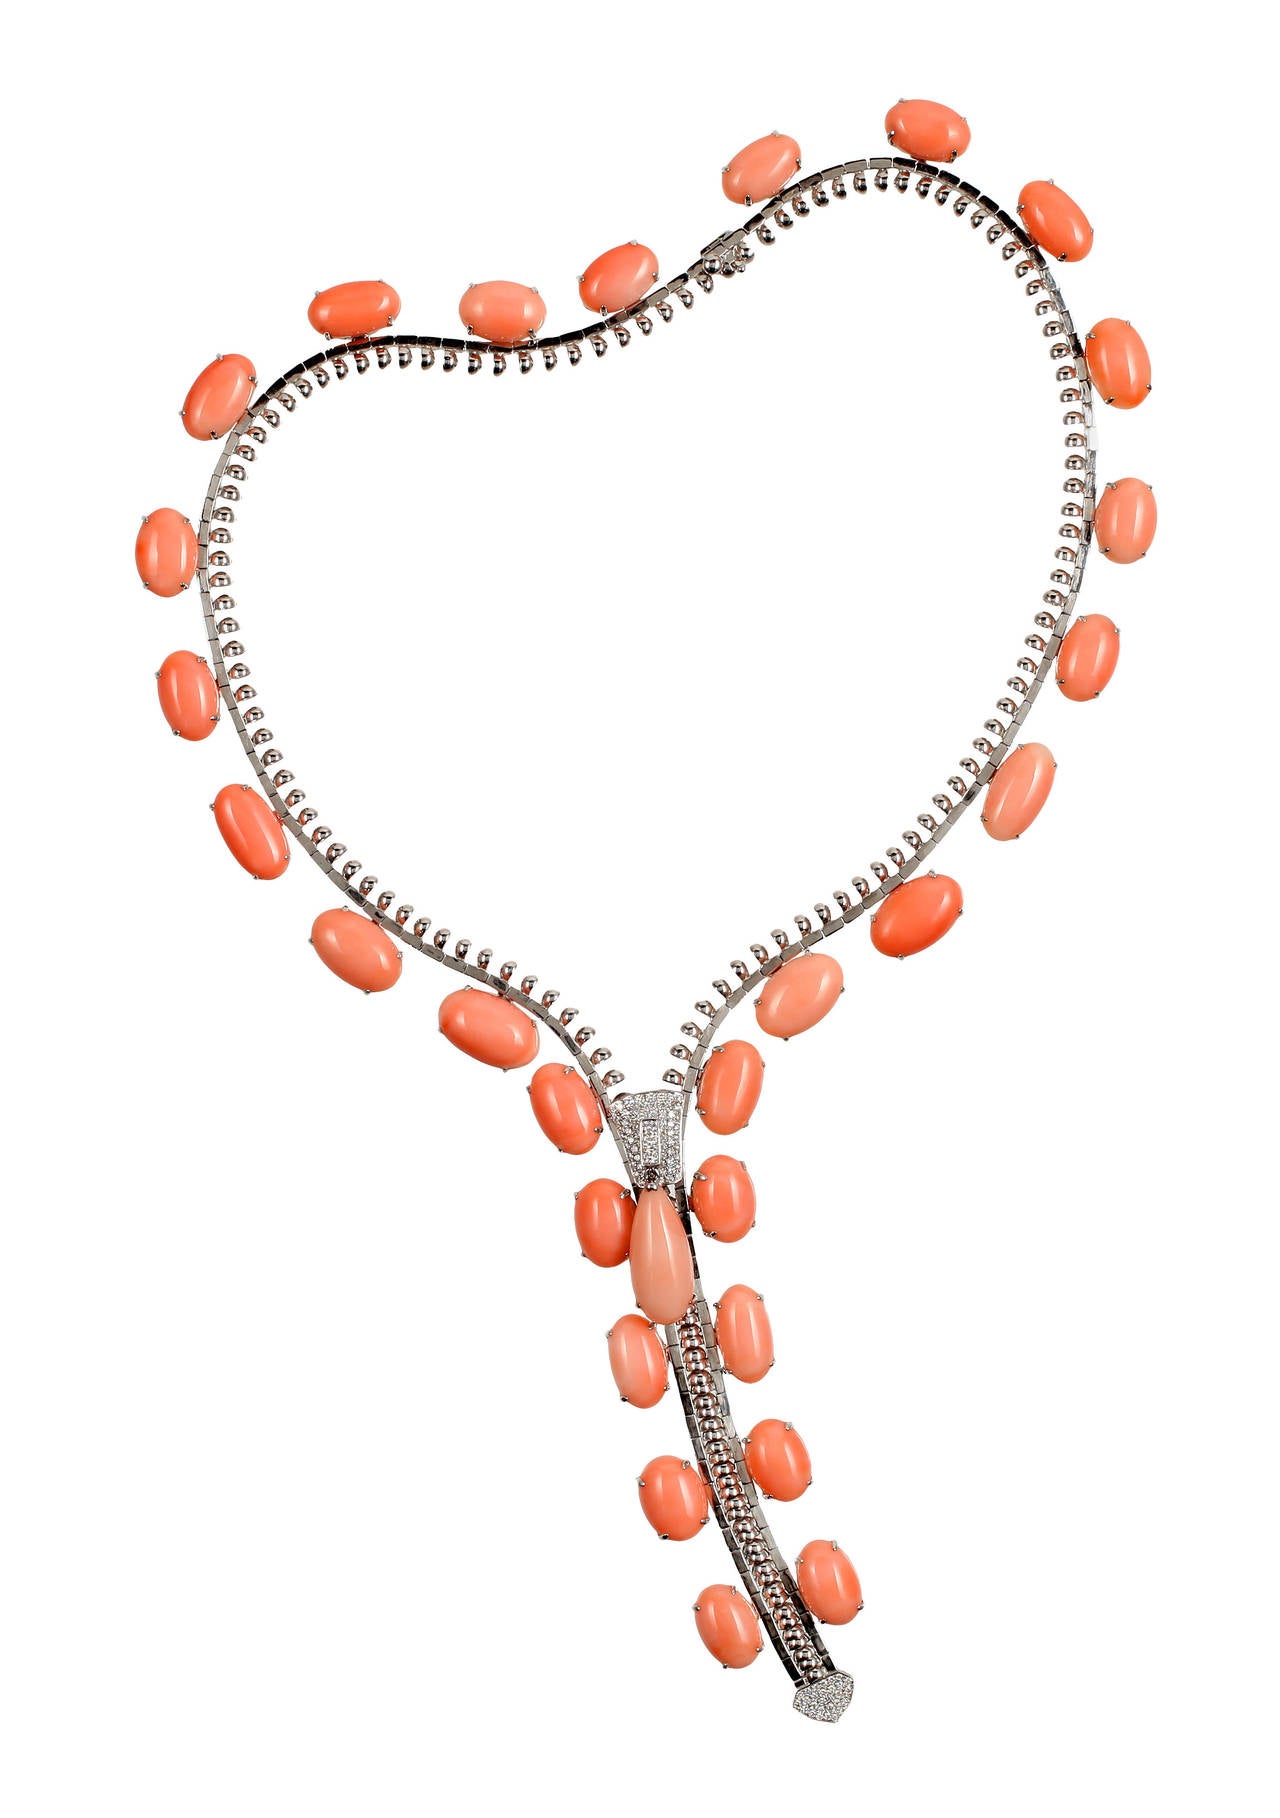 The necklace is fully functional Zipper in 18 KT Whitegold, adorned with 29 Cabochons of Natural Angel Skin Coral, 79.49 ct., and with 100 Diamonds, 1.28 ct.,  TW/ vsi - si, mounted in 18 KT White gold. The Diamonds are set on the slider and at the